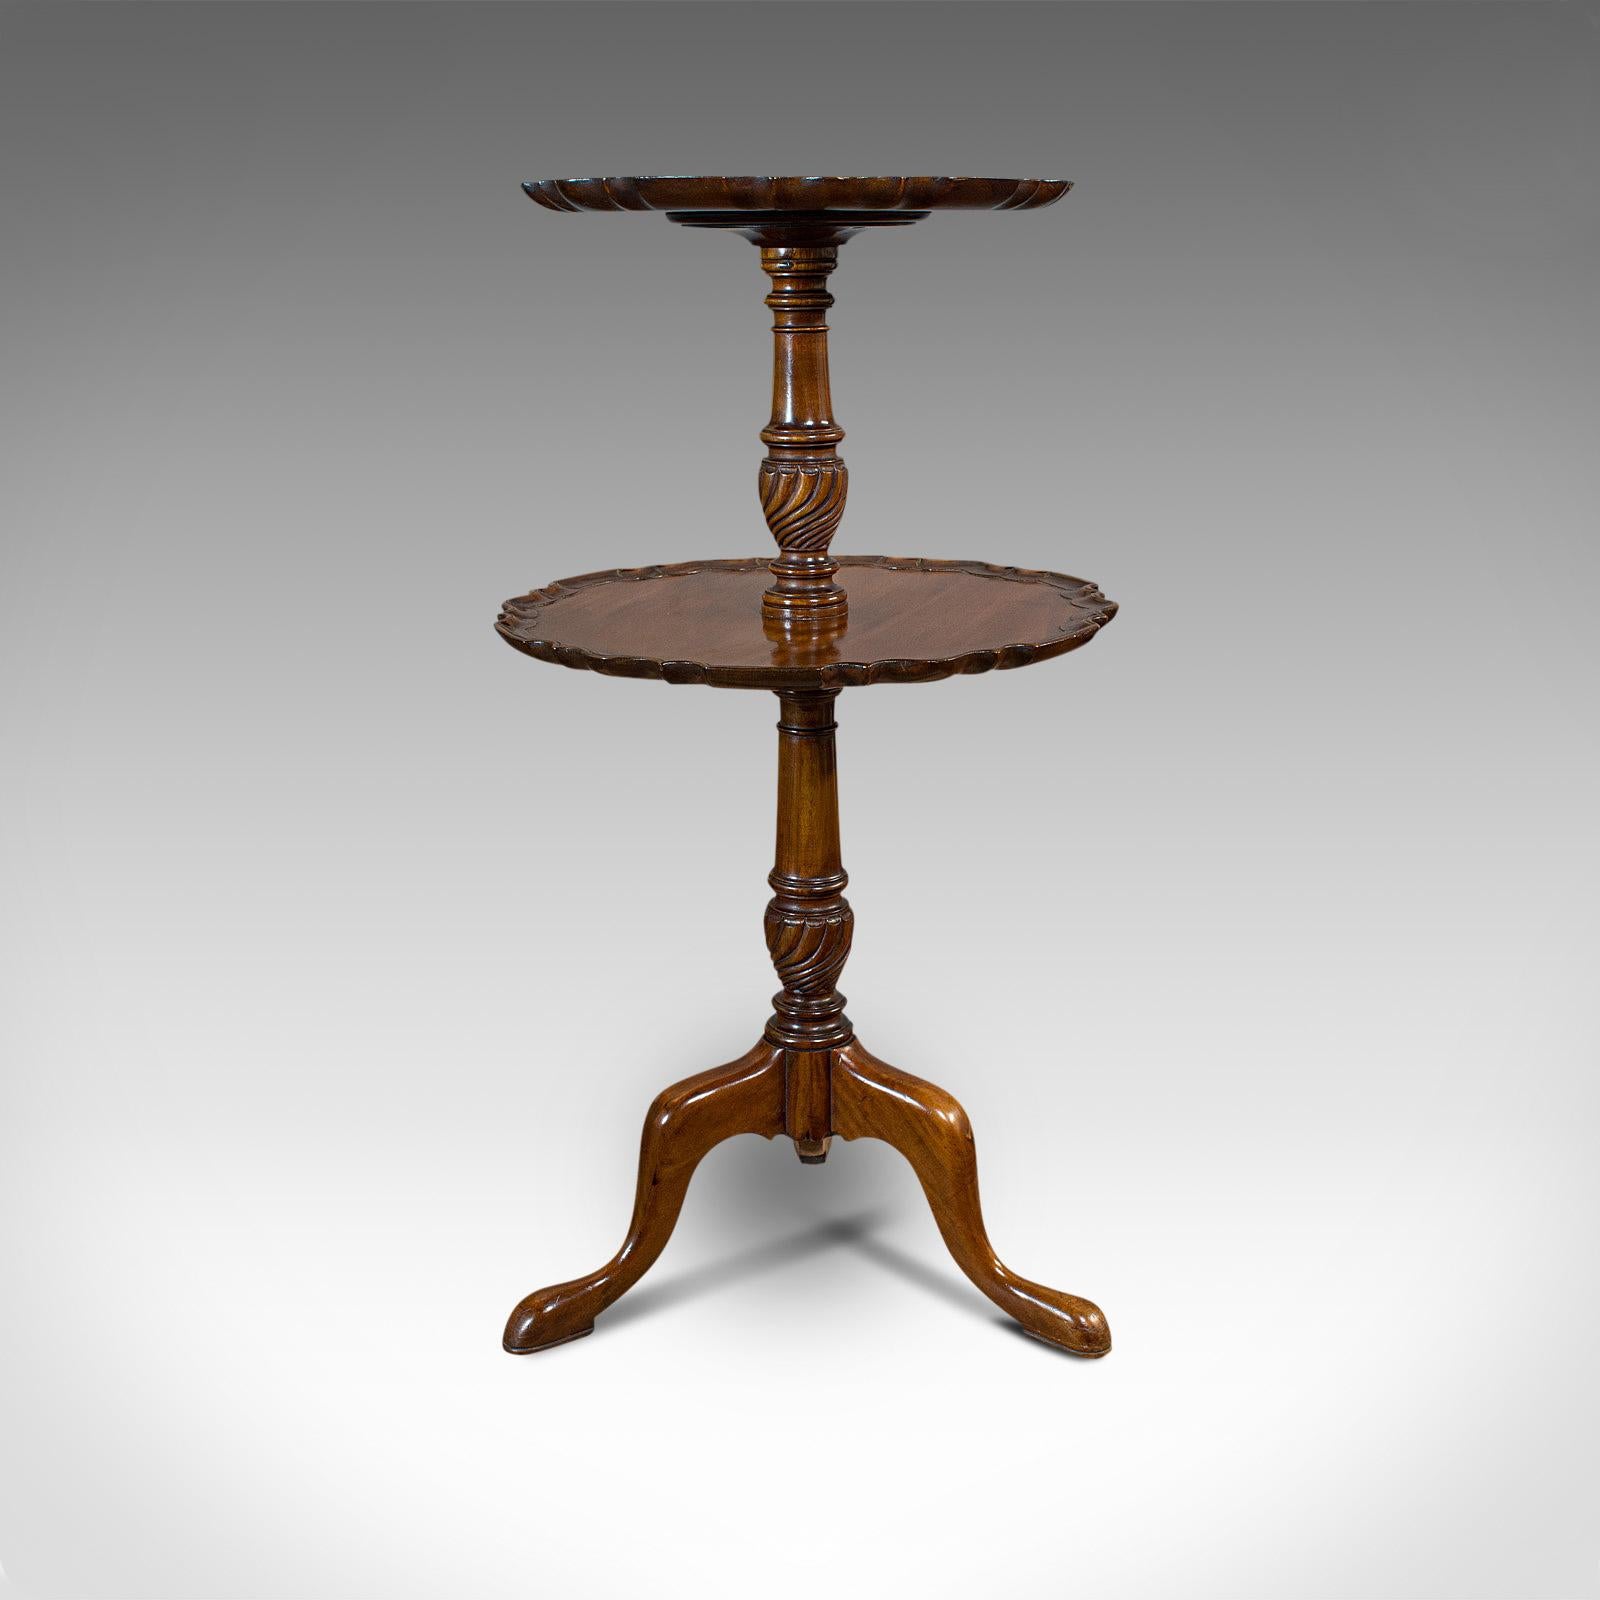 This is an antique whatnot stand. An English, mahogany two-tier afternoon tea table, dating to the Victorian period, circa 1900.

Attractive form and useful proportion
Displays a desirable aged patina
Select mahogany shows fine grain